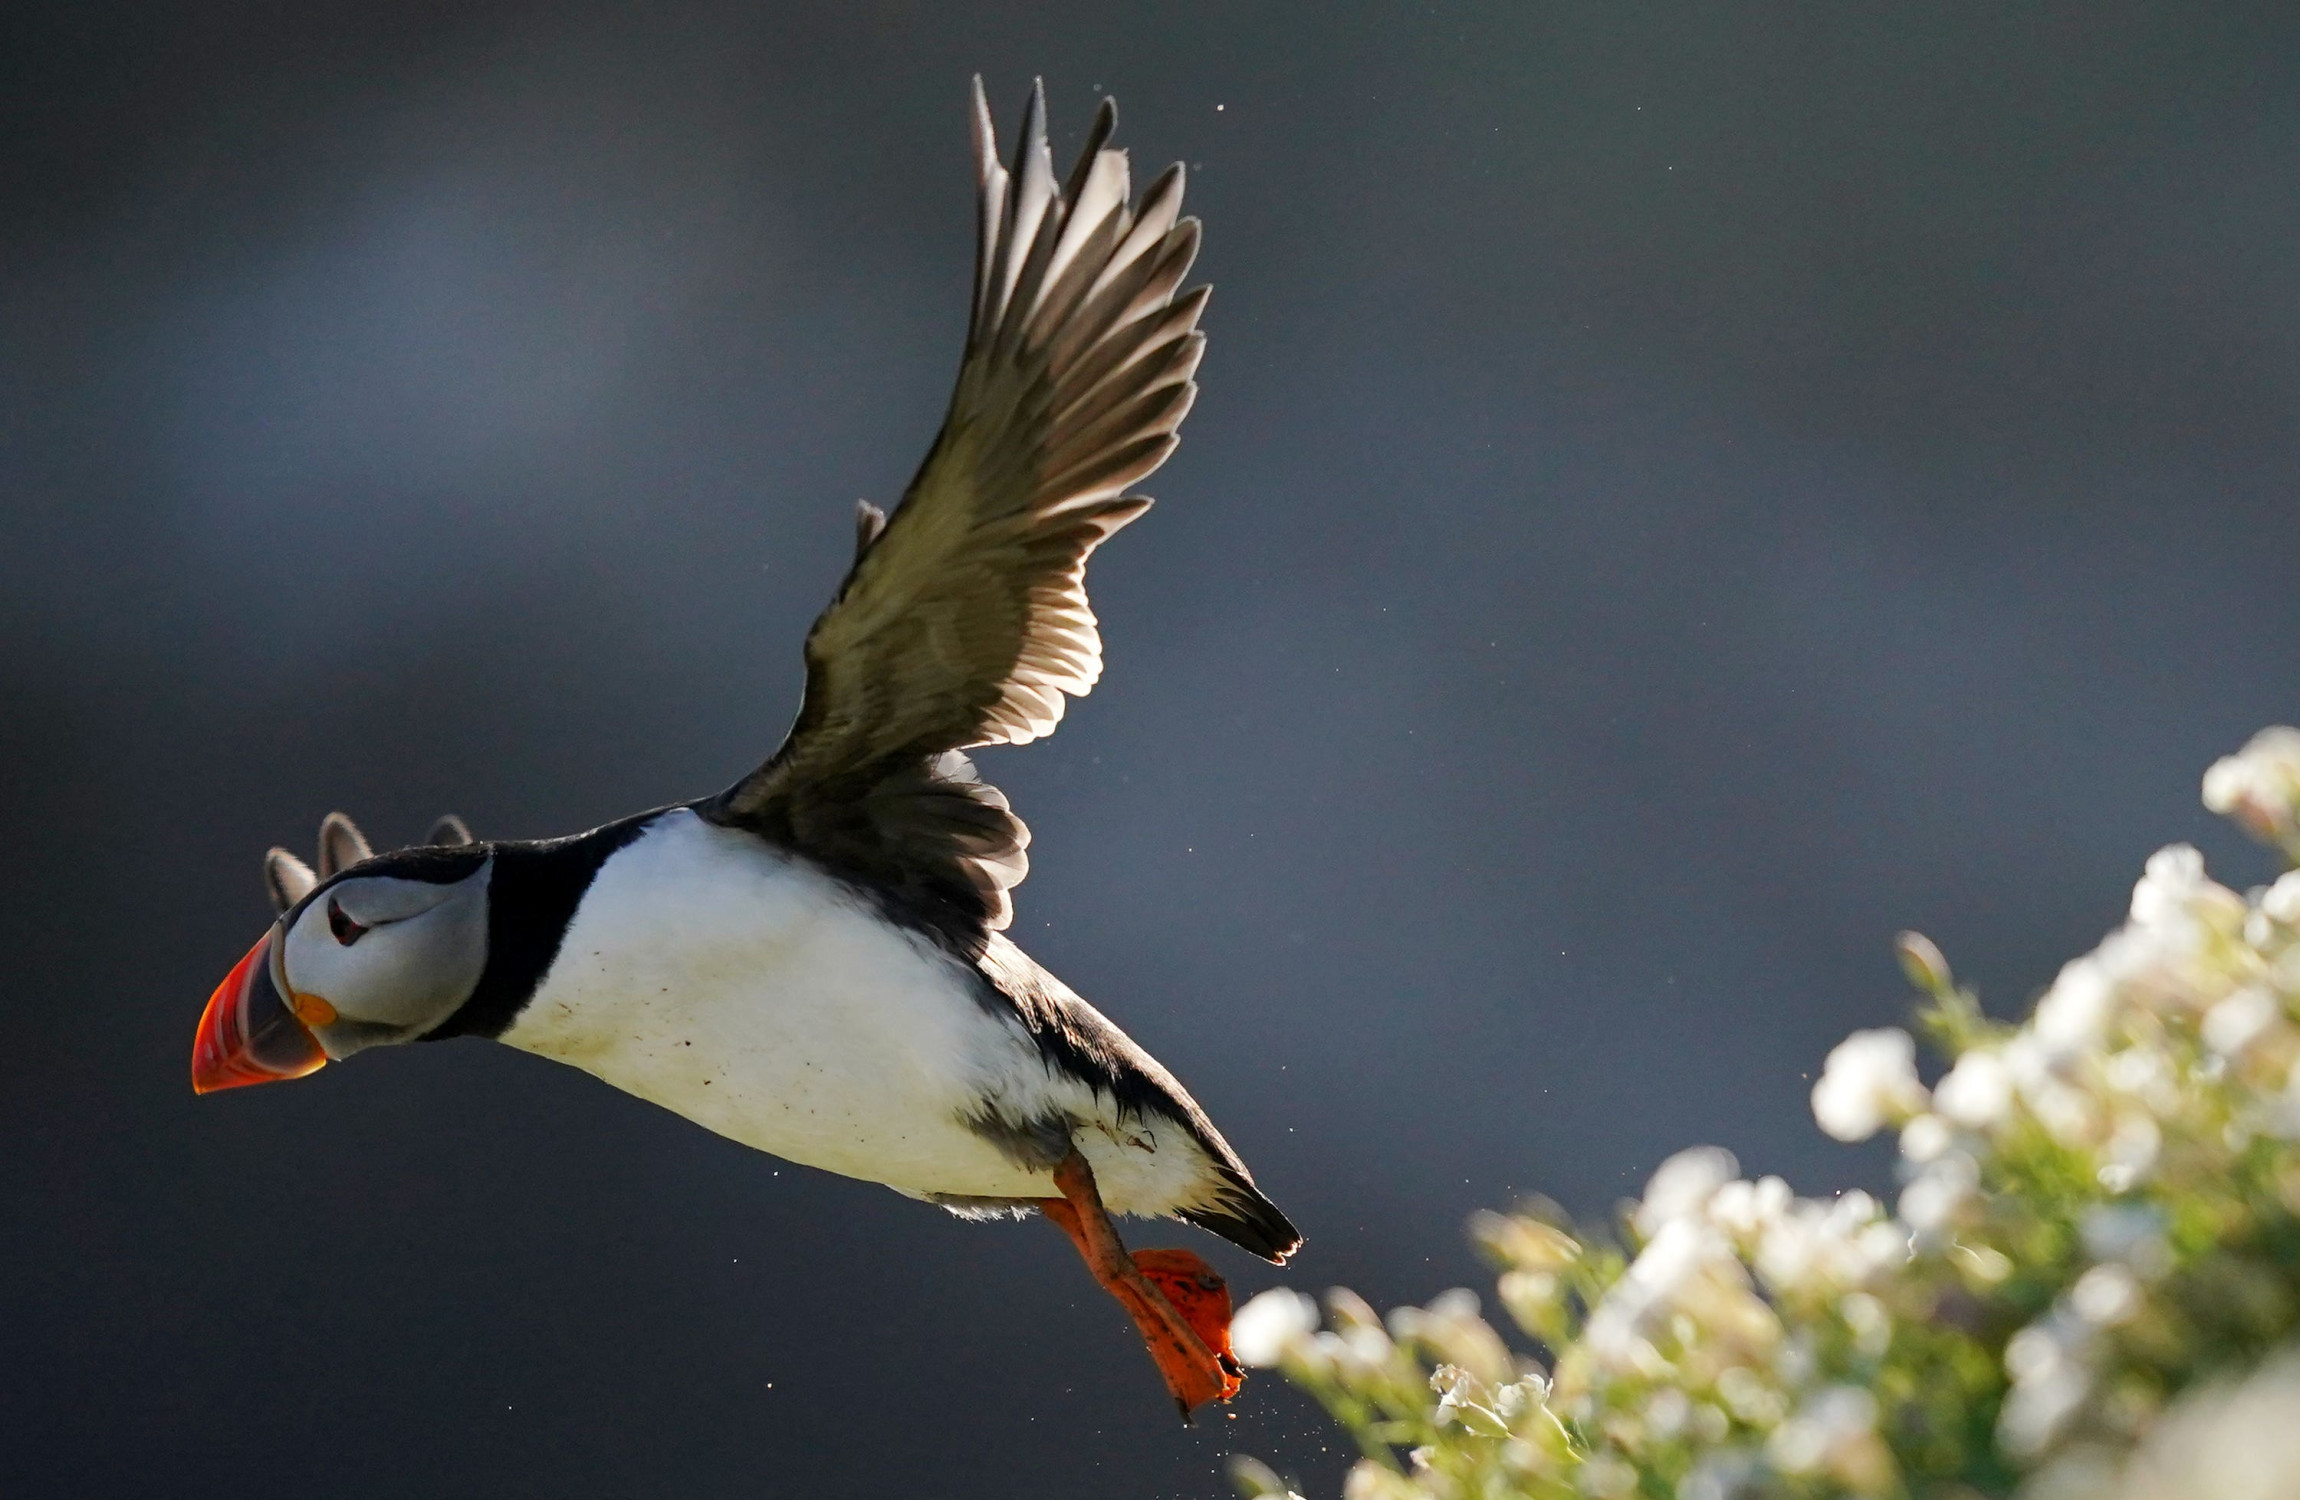 Ireland's puffin population may appear to be thriving, but more research needed, experts warn